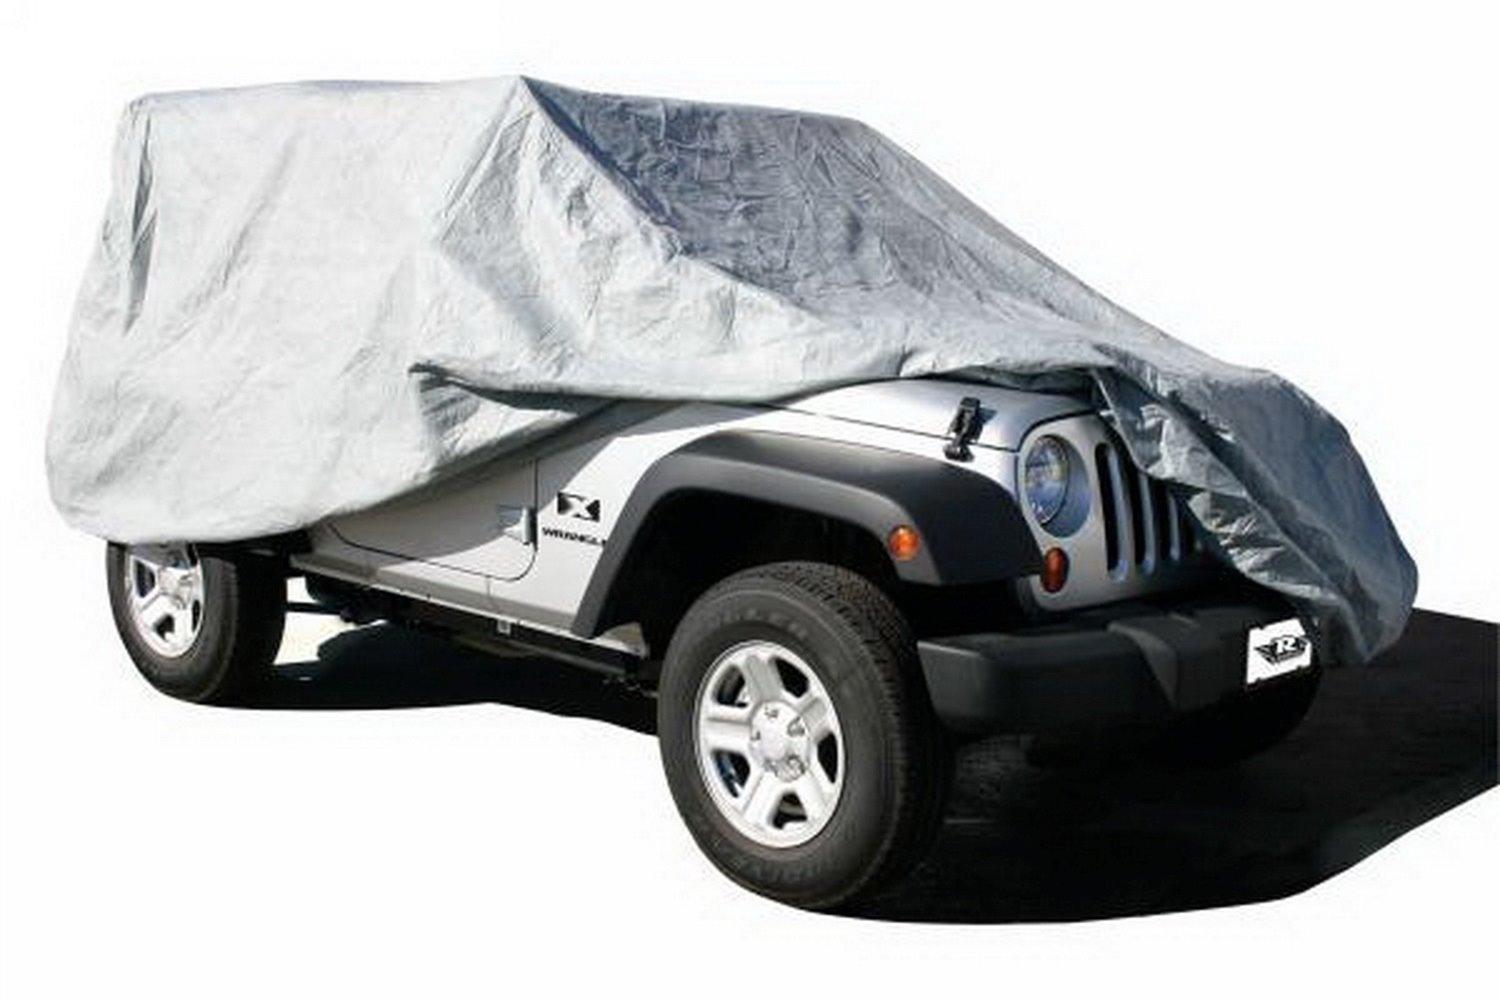 4 Layer Car Cover for 2007-2018 Jeep Wrangler JK and 2018 Jeep Wrangler JL 2-Door Models